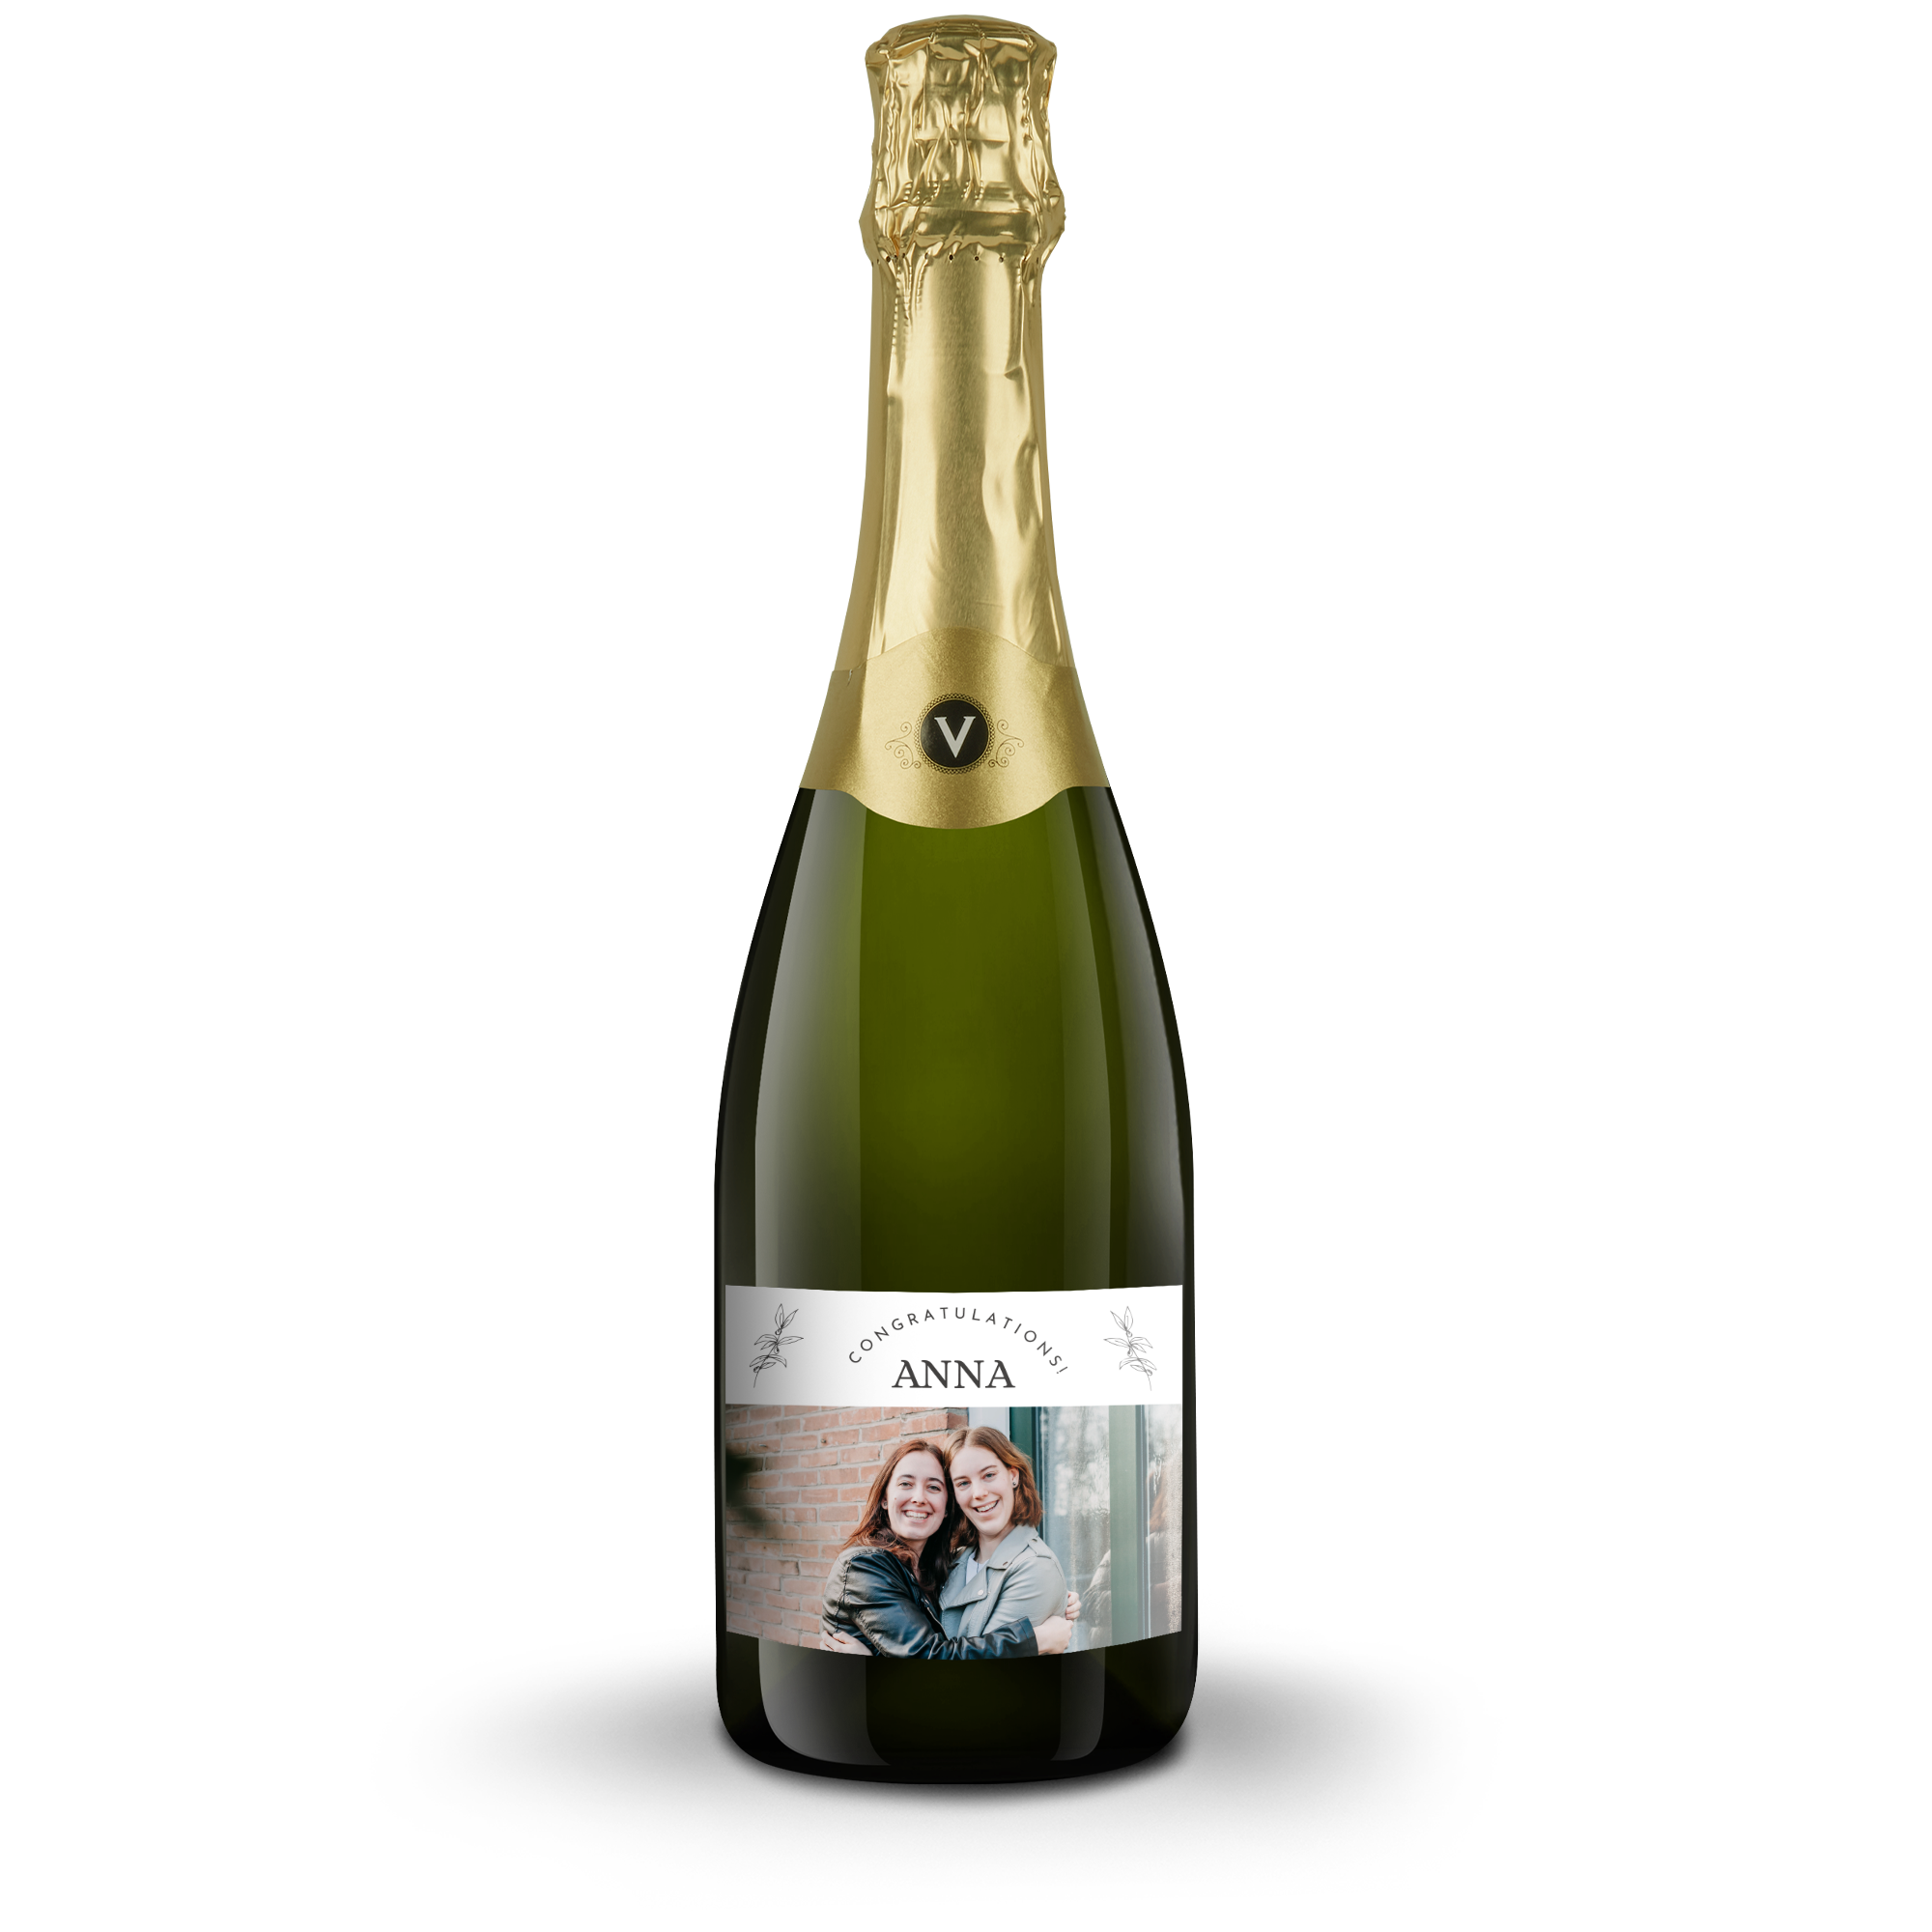 Vintense Blanc alcohol-free - With personalised label